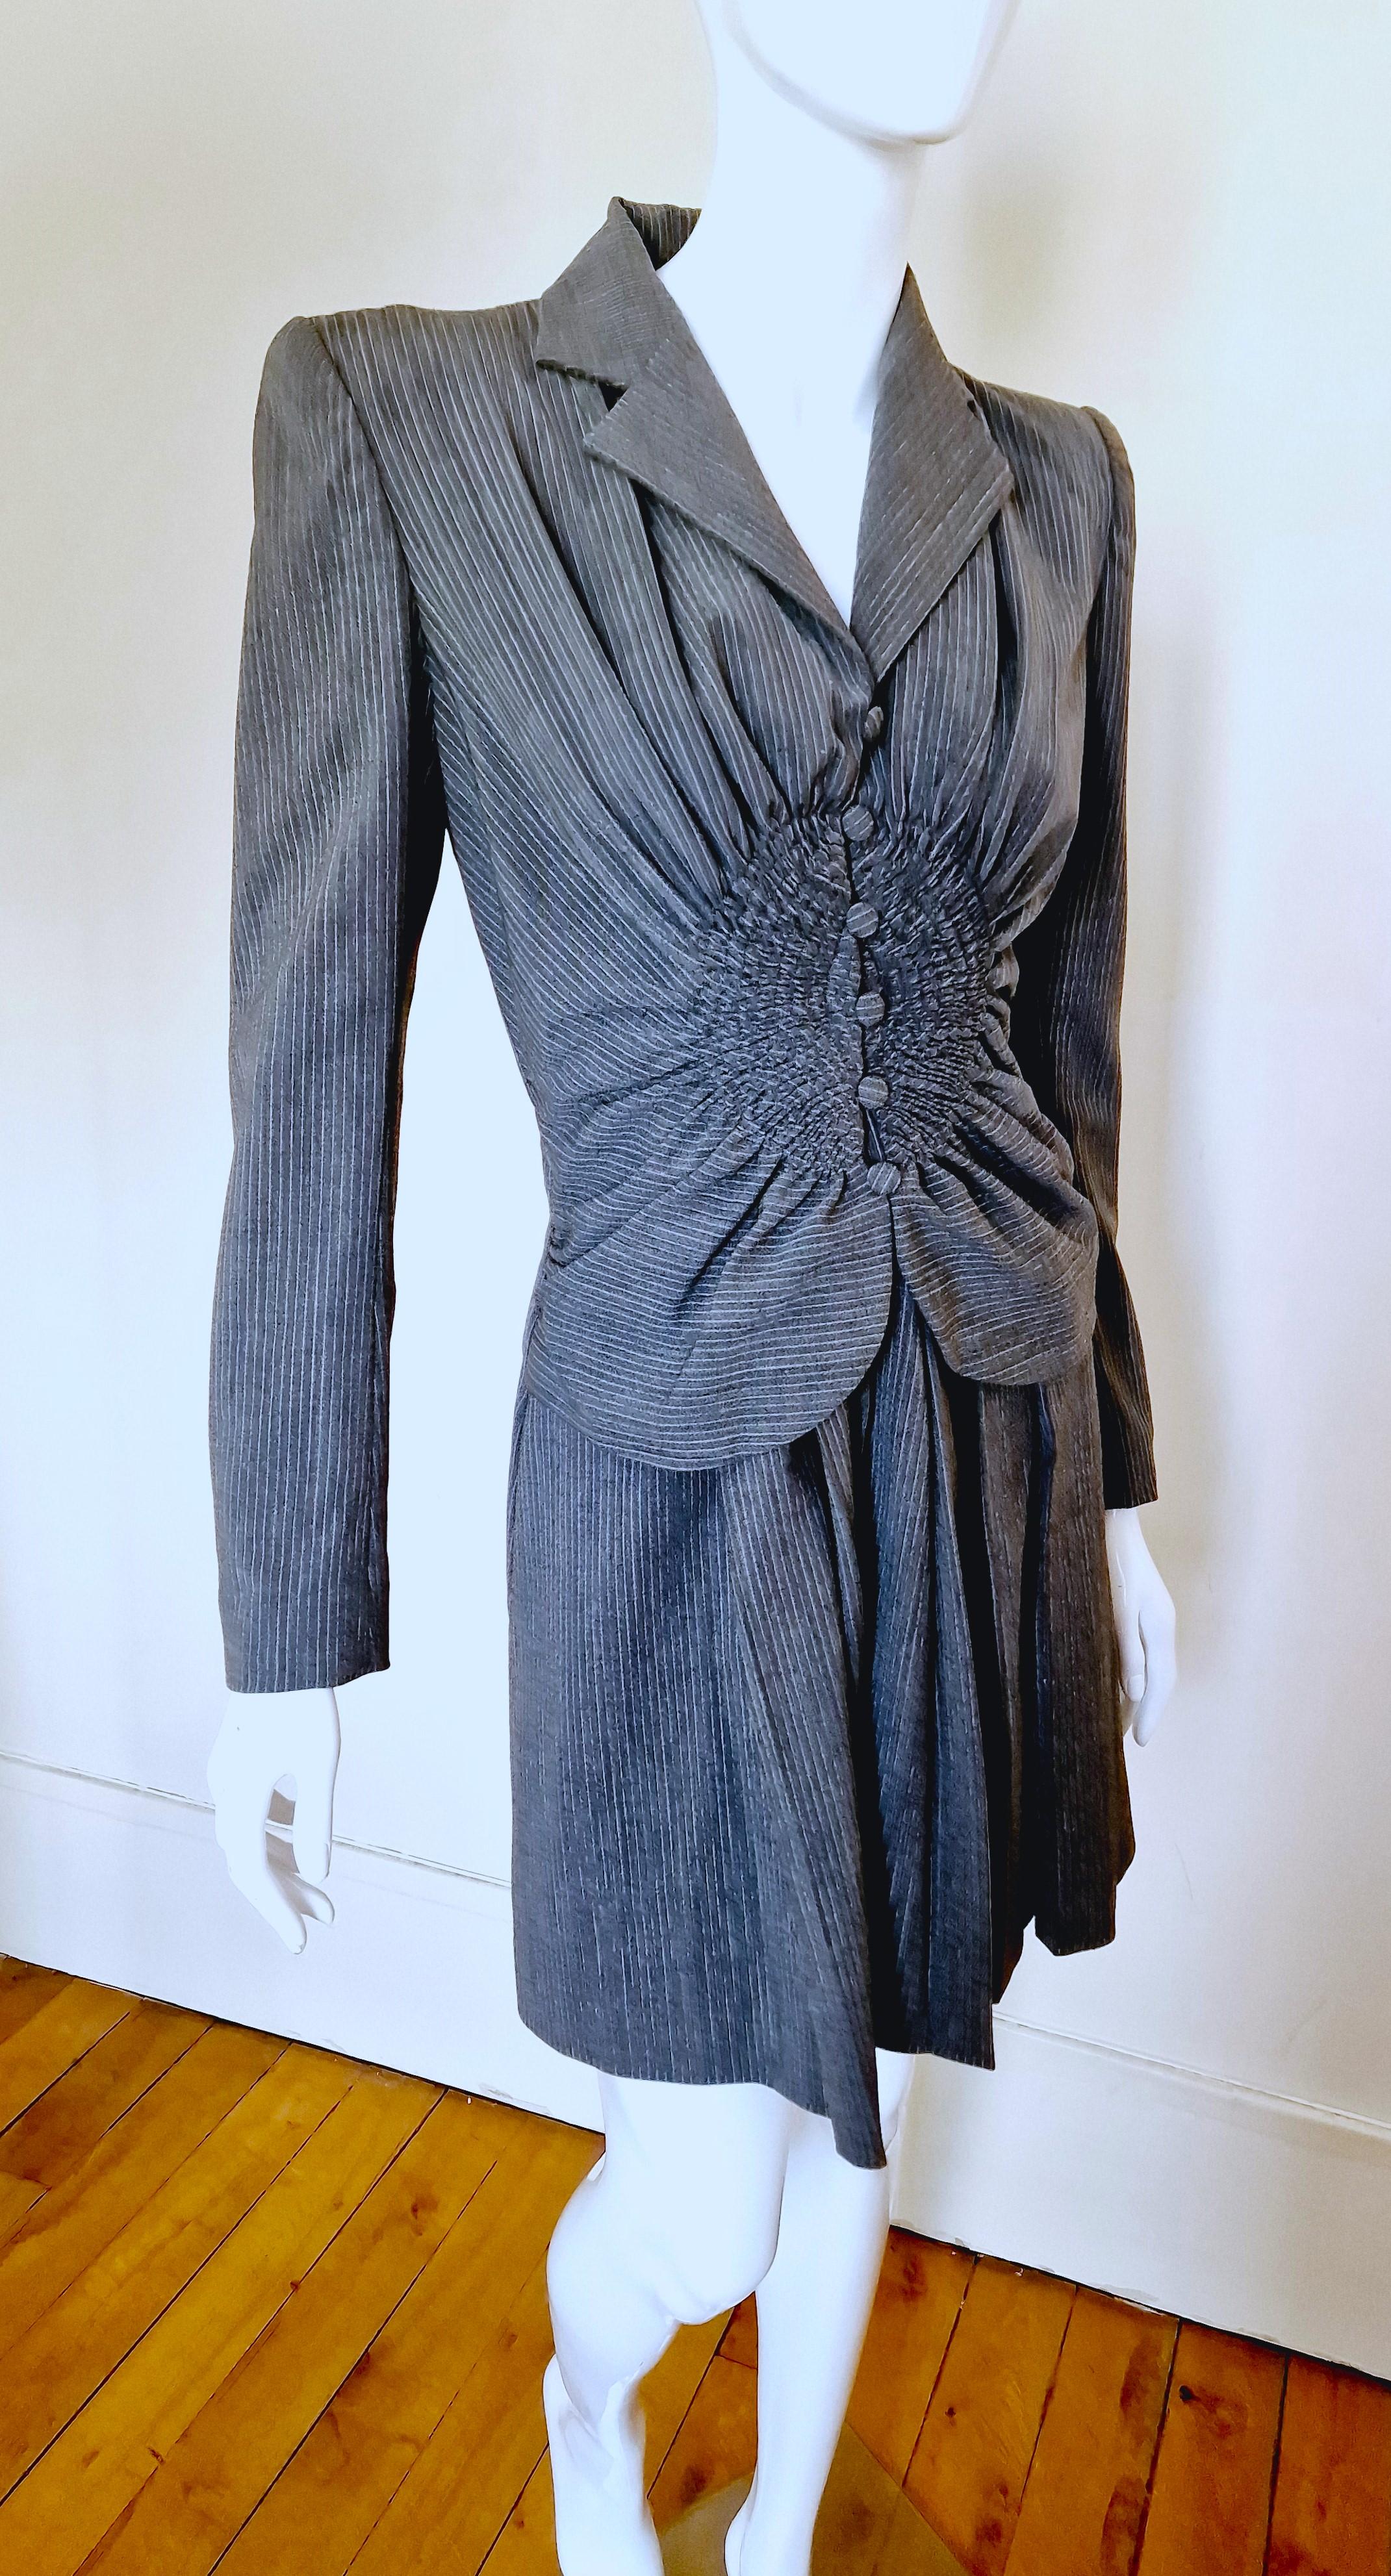 John Galliano Runway 1997 A/W Suzy Phinix Ruched Gray Kendall Jenner Suit Dress 5